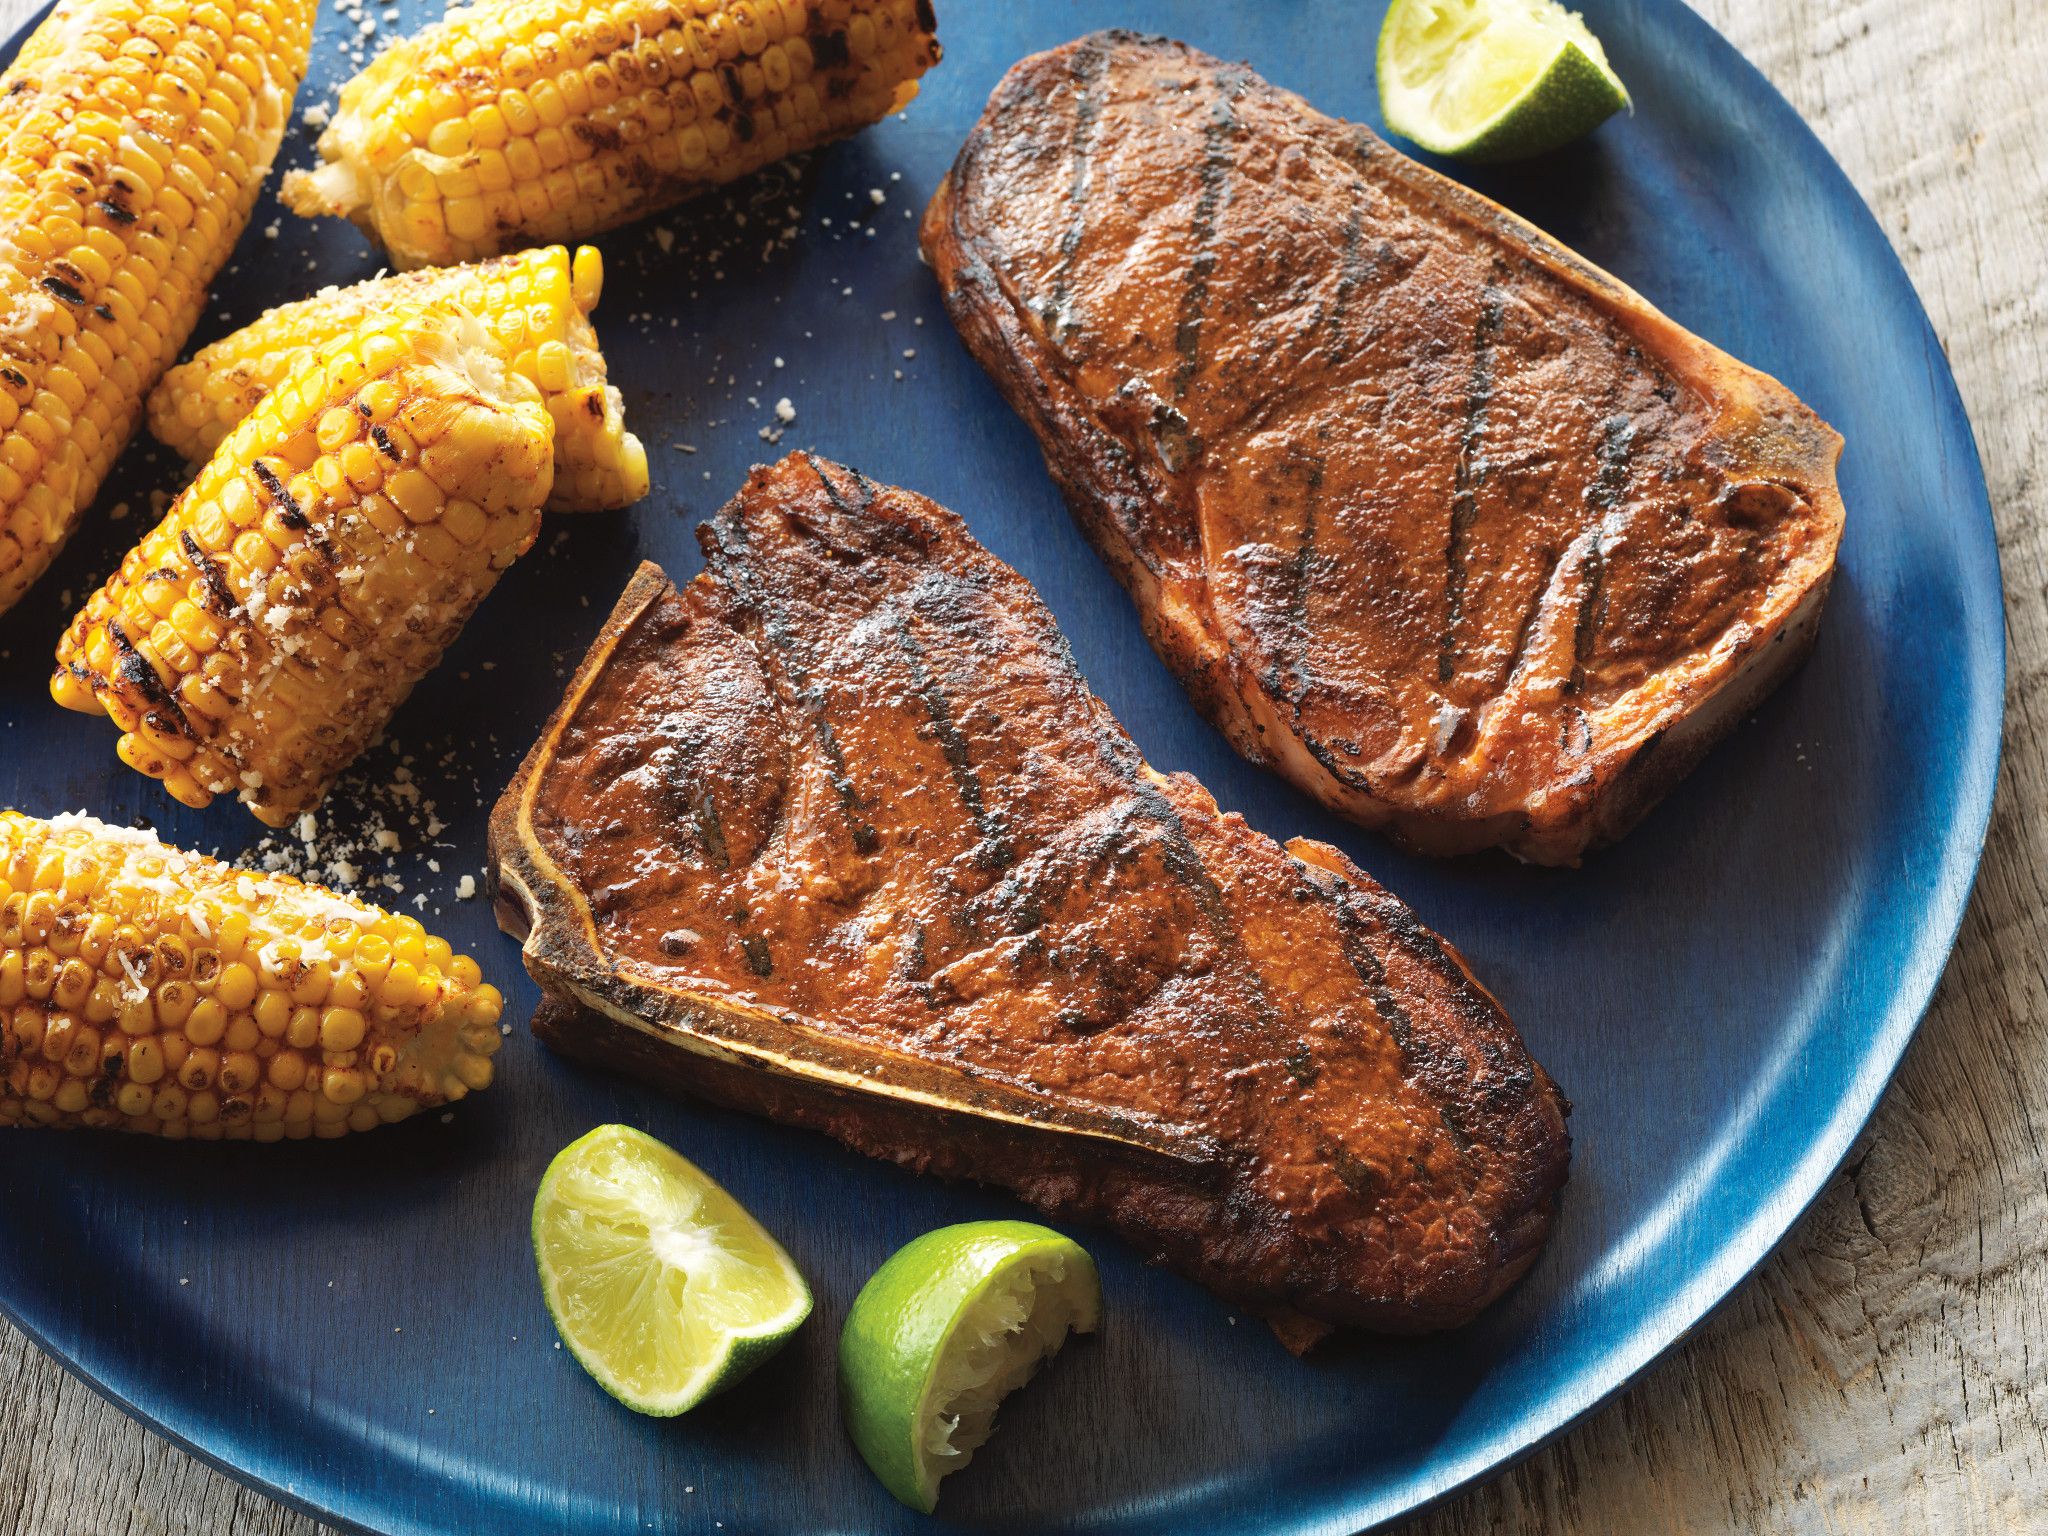 http://embed.widencdn.net/img/beef/qdfgb06nee/exact/smoky-grilled-strip-steaks-with-mexican-style-corn.tif?keep=c&u=7fueml